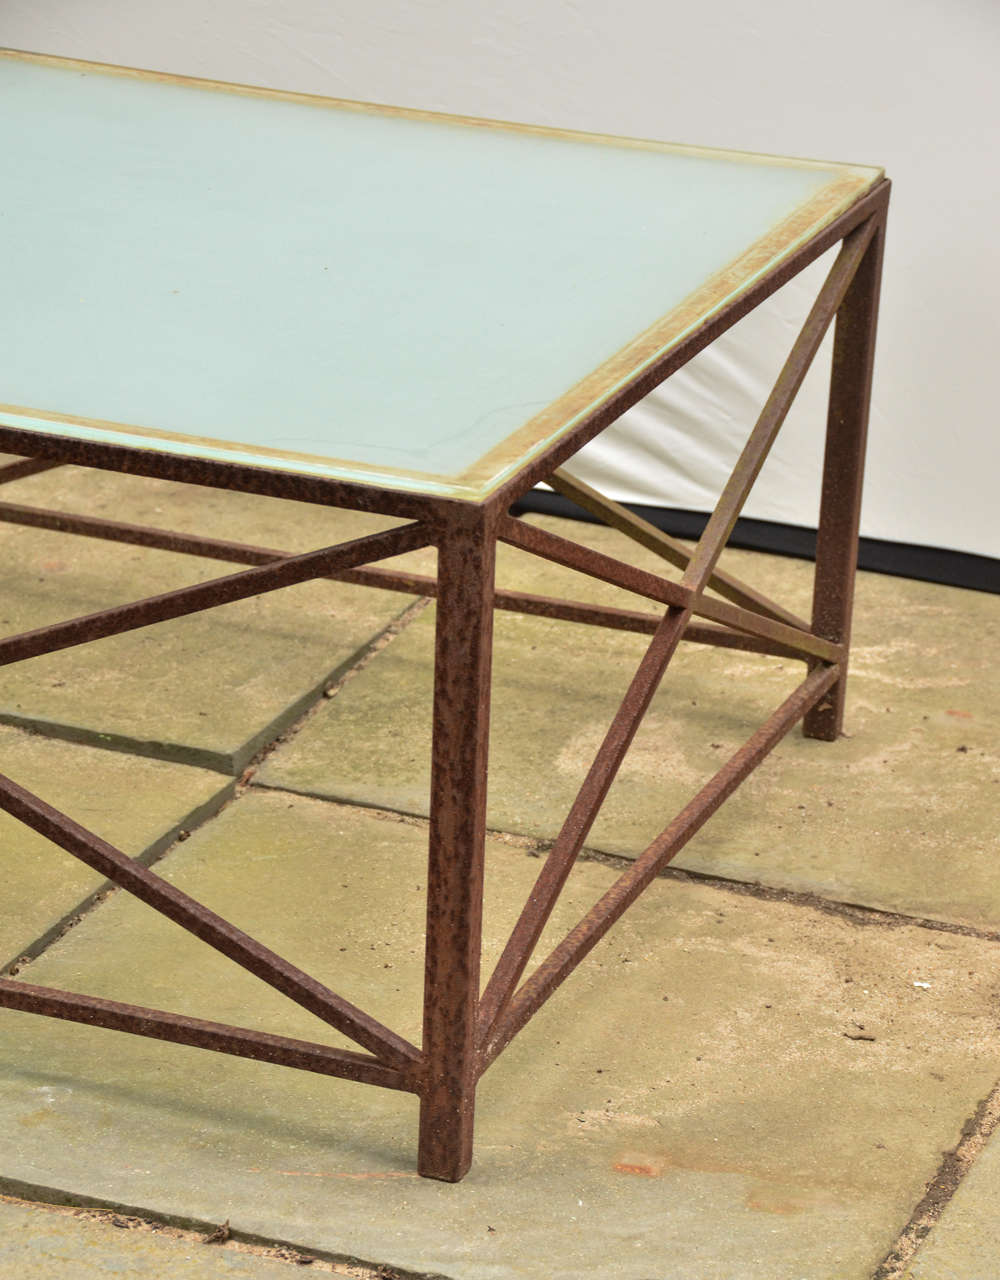 Neoclassical Revival American Rusted Iron Coffee Table with 